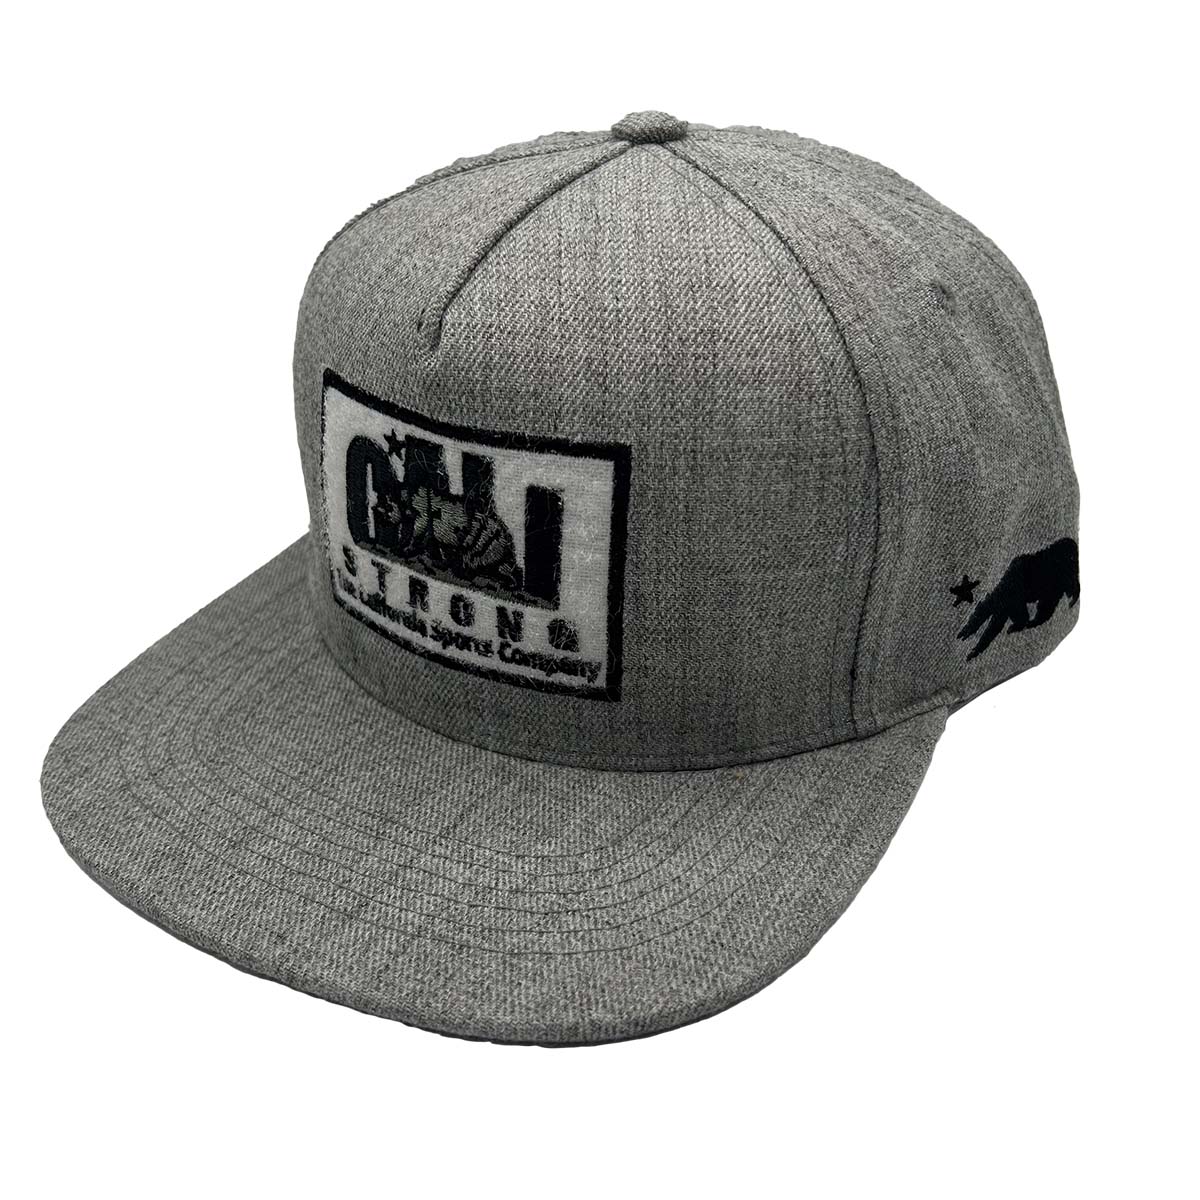 CALI Strong Original Tactical Hat Flat Bill Morale Patch Gray Heather